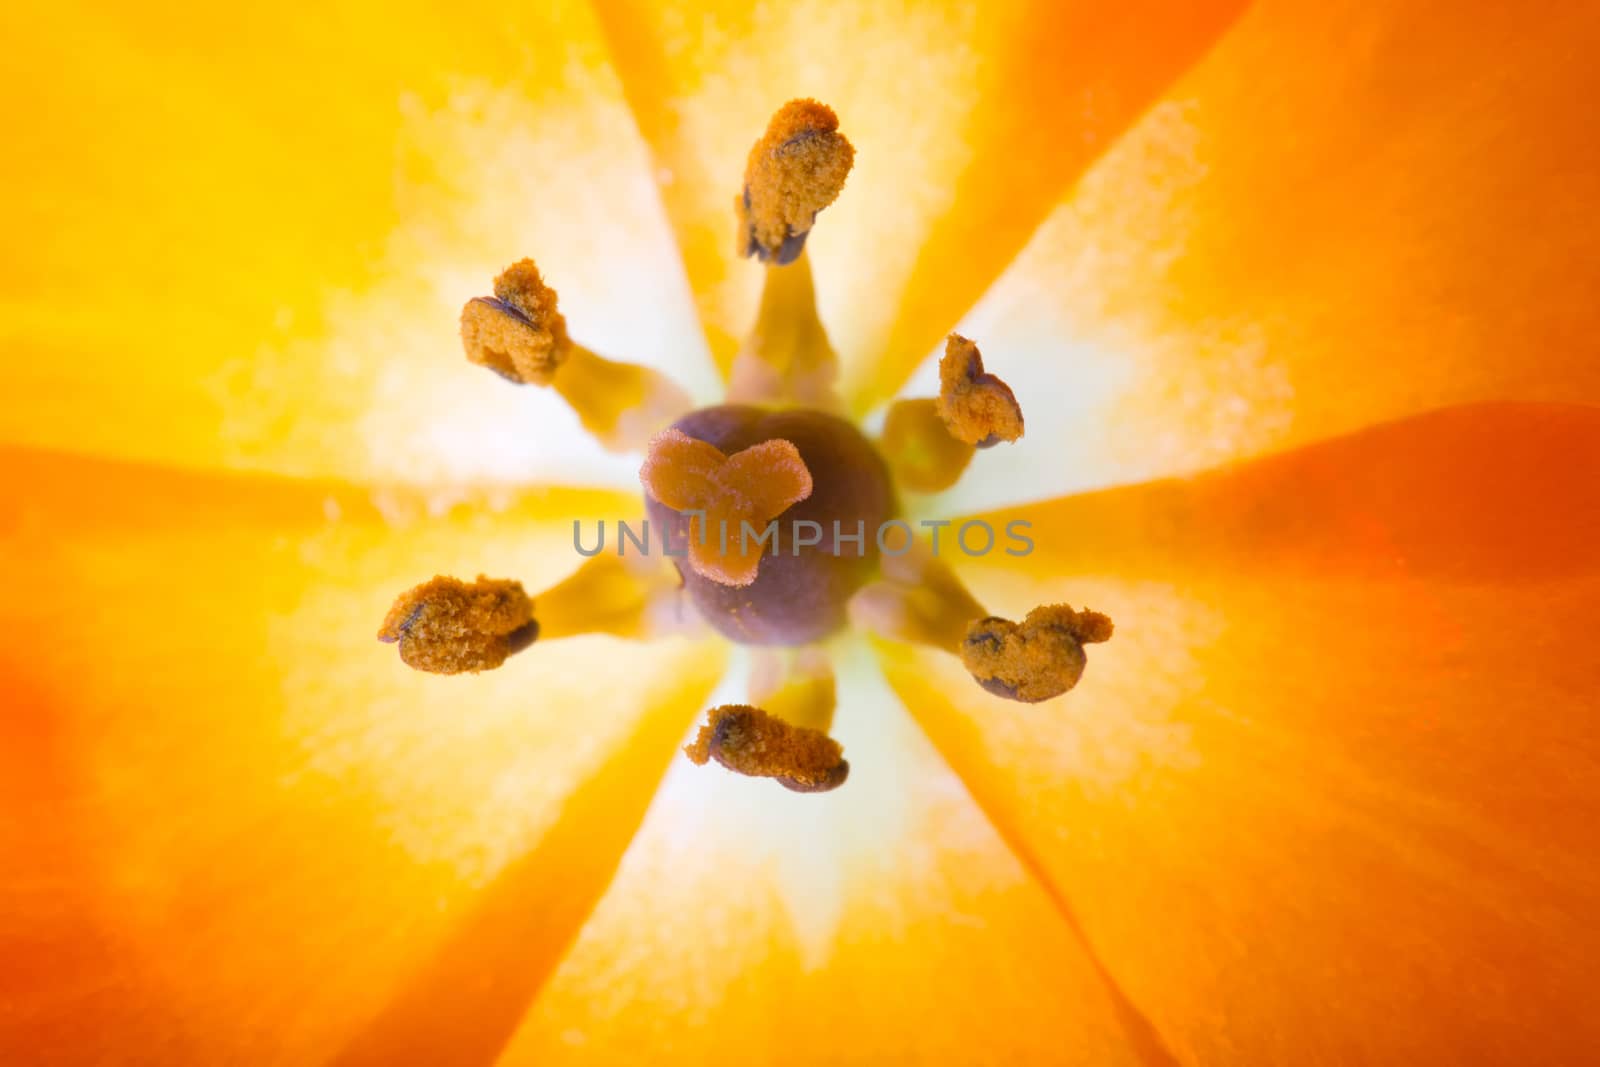 Close-up of a Sun Star (lat. Ornithogalum Dubium) with pistil and petals